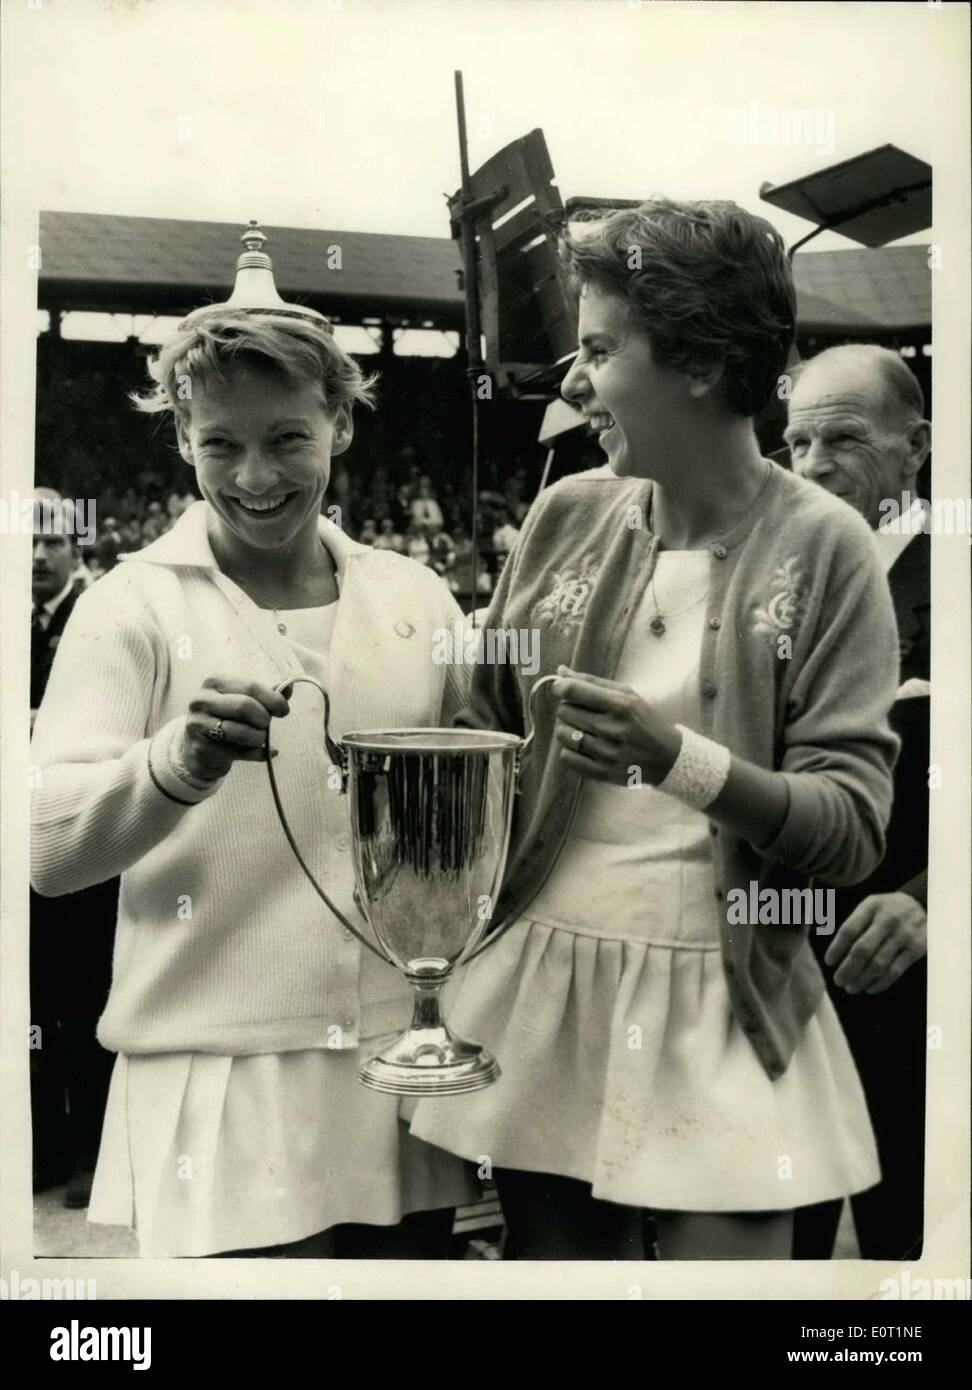 Jul. 02, 1960 - Women's Doubles final at Wimbledon. Fun with the cup. Photo shows Darlene Hard (USA) has a spot of fun by placing the lid of the Ladies Doubles Trophy - which she and Maria Bueno (Brazil) won by beating the south African Pair - Miss Reynolds and Miss Schuurman - at Wimbledon this afternoon. Stock Photo